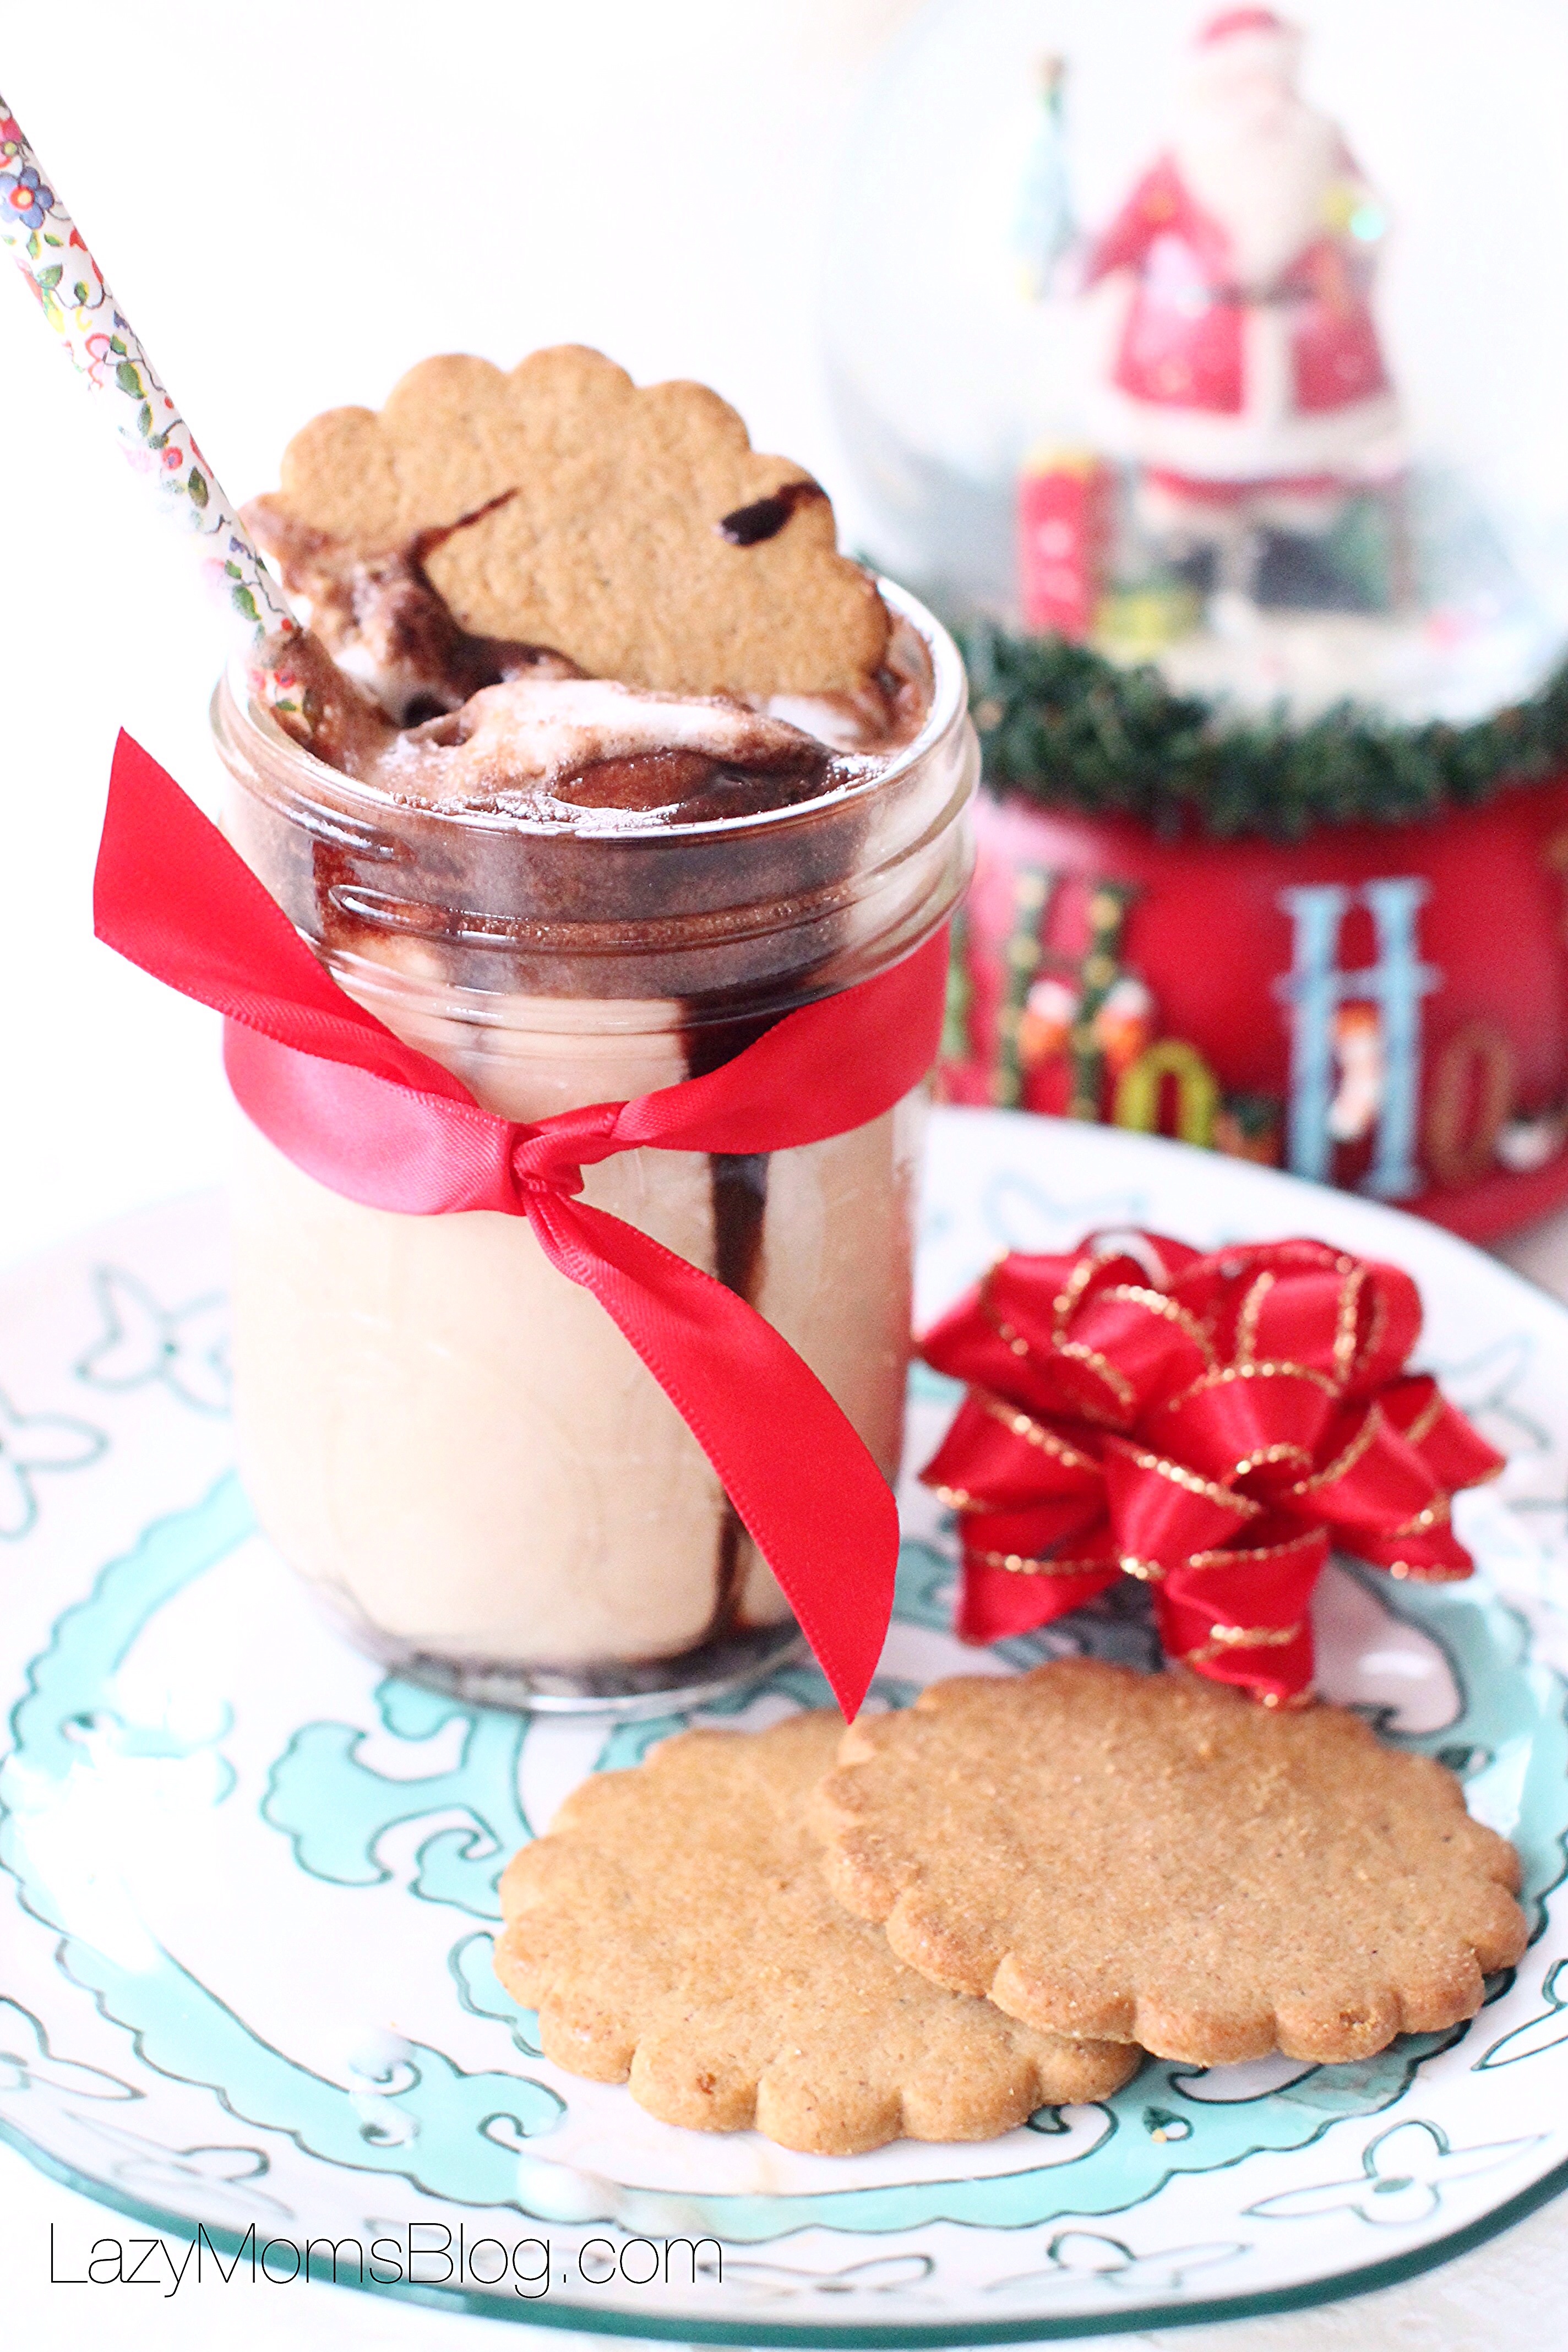 This chocolate peanut butter and gingerbread Christmas shake is a perfect treat!  